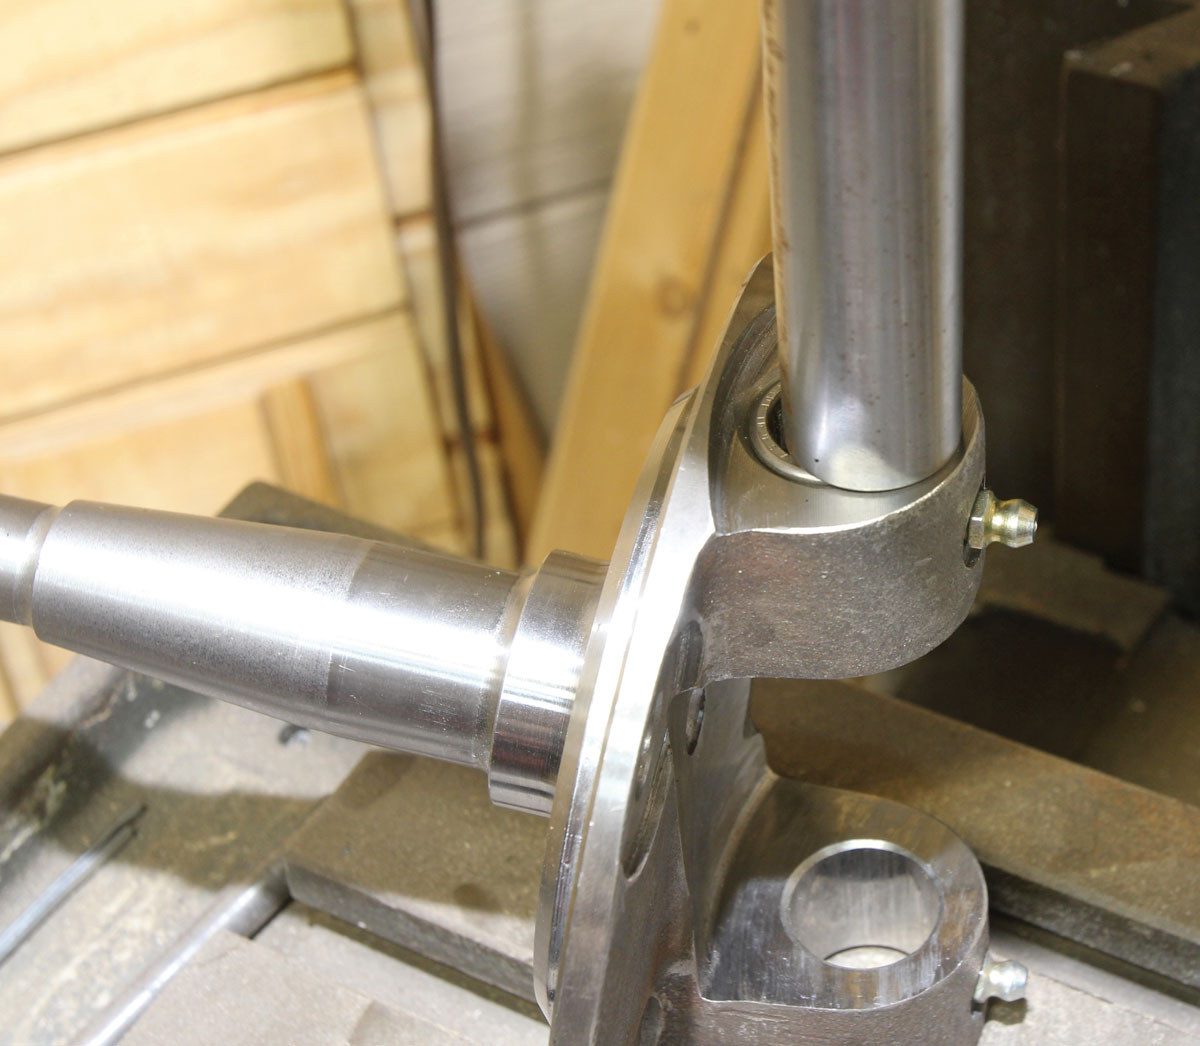 bearing flushed with the spindle casting and no further